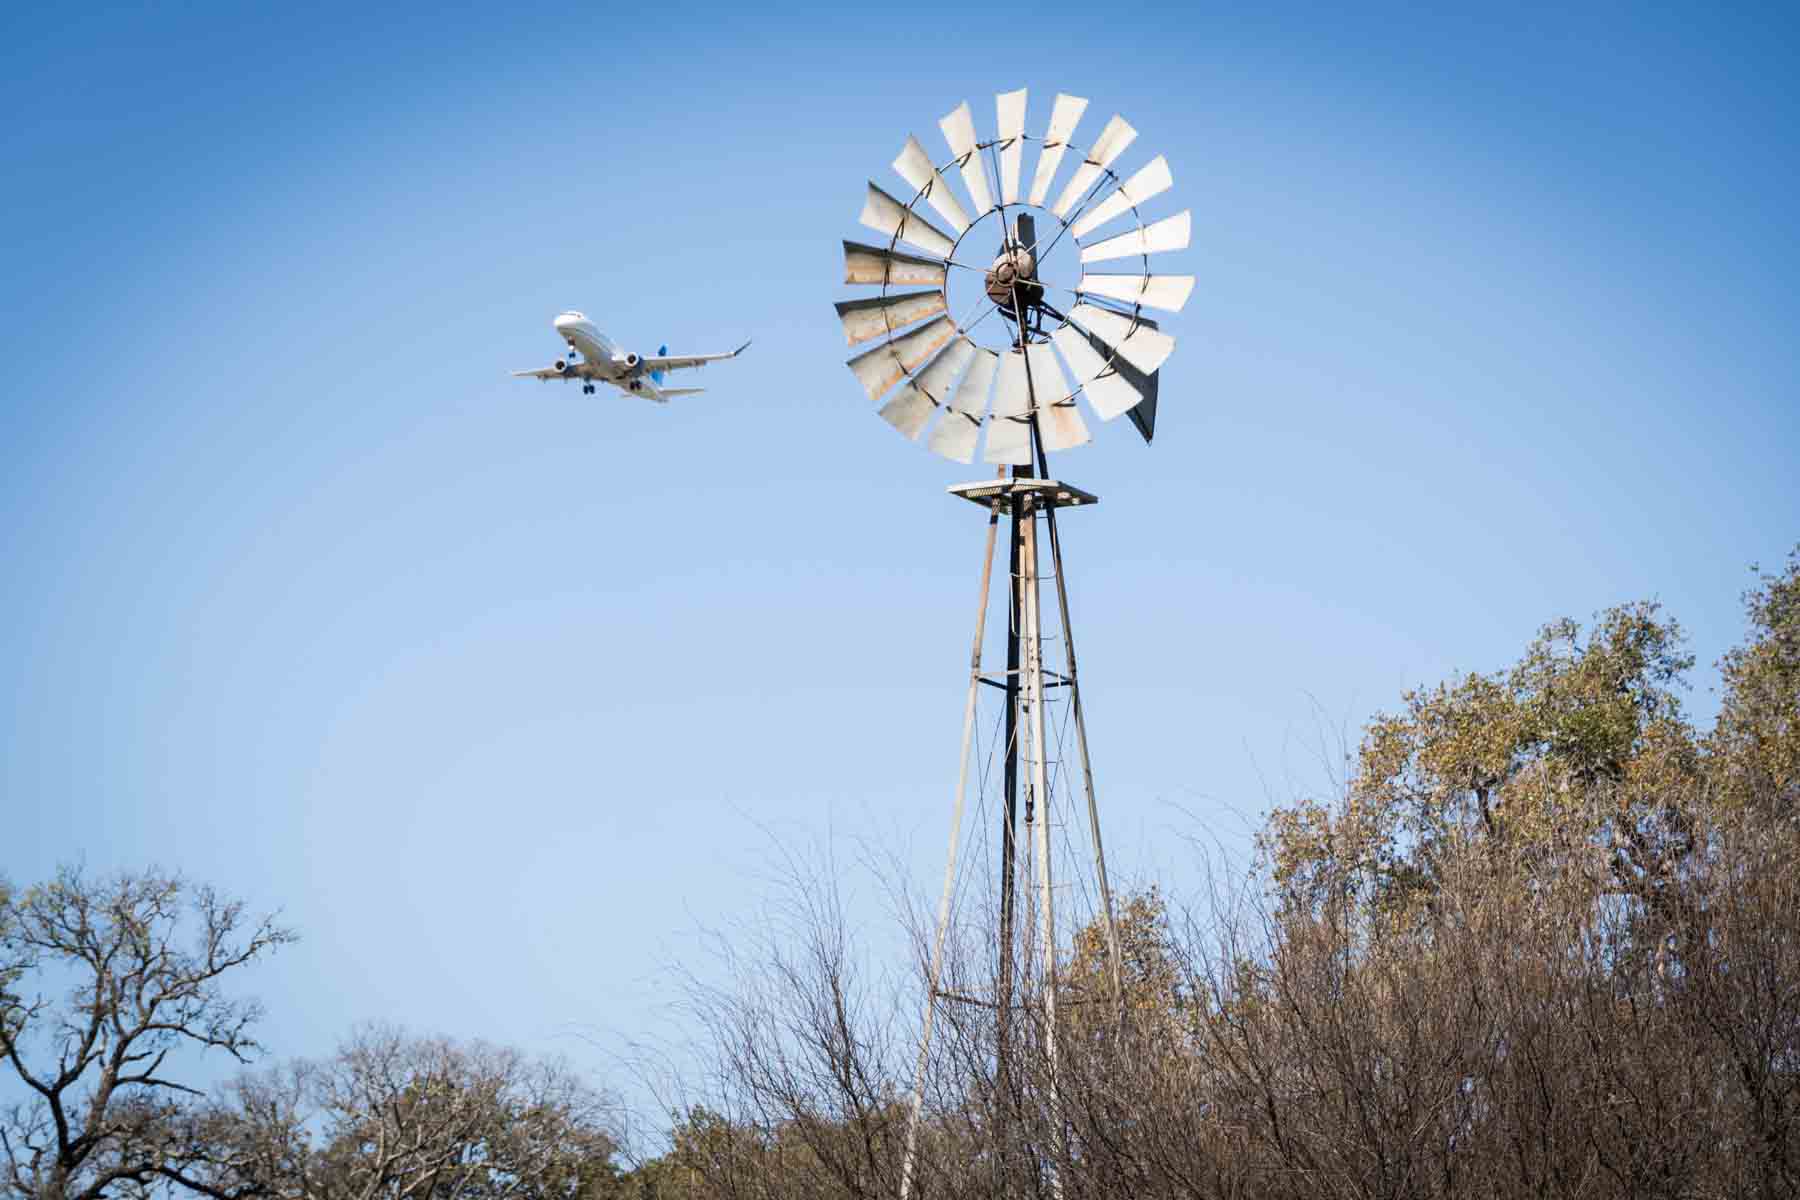 Airplane flying near metal fan in Walker Ranch Park for an article on the best San Antonio parks for family portraits